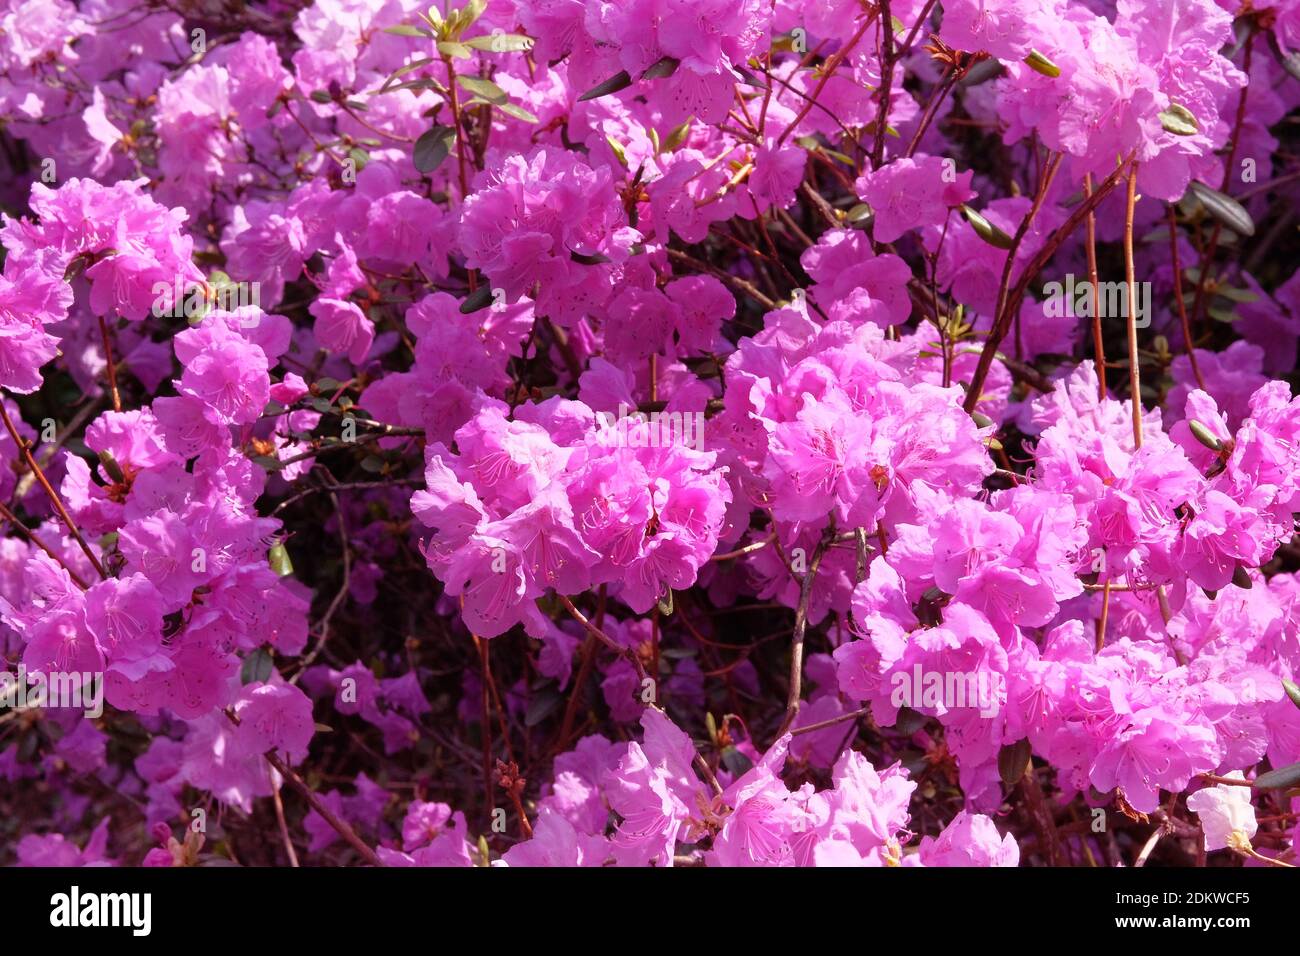 Rhododendron is blooming in city park, close up. Violet gentle flowers is growing in garden. Landscaping and decoration in spring season. Stock Photo